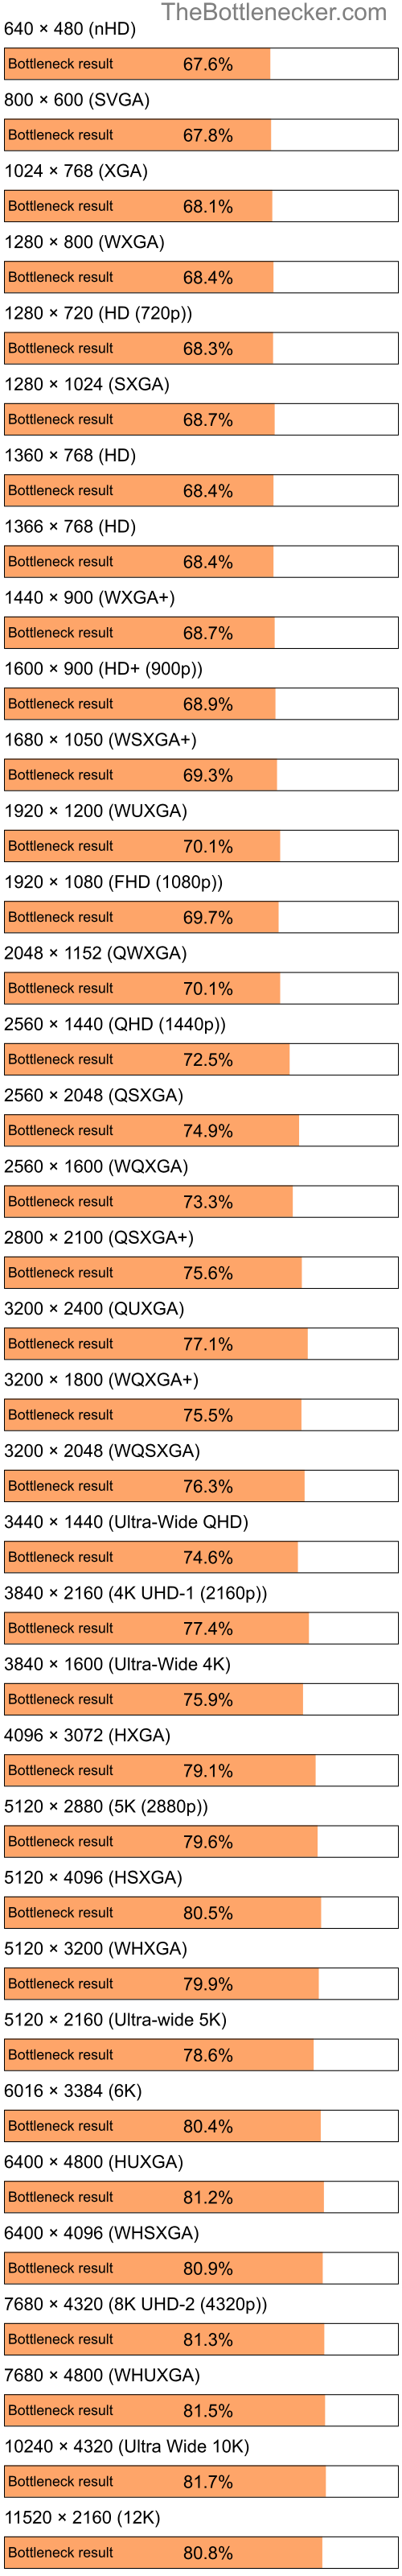 Bottleneck results by resolution for Intel Atom Z520 and NVIDIA Quadro FX 3000 in General Tasks